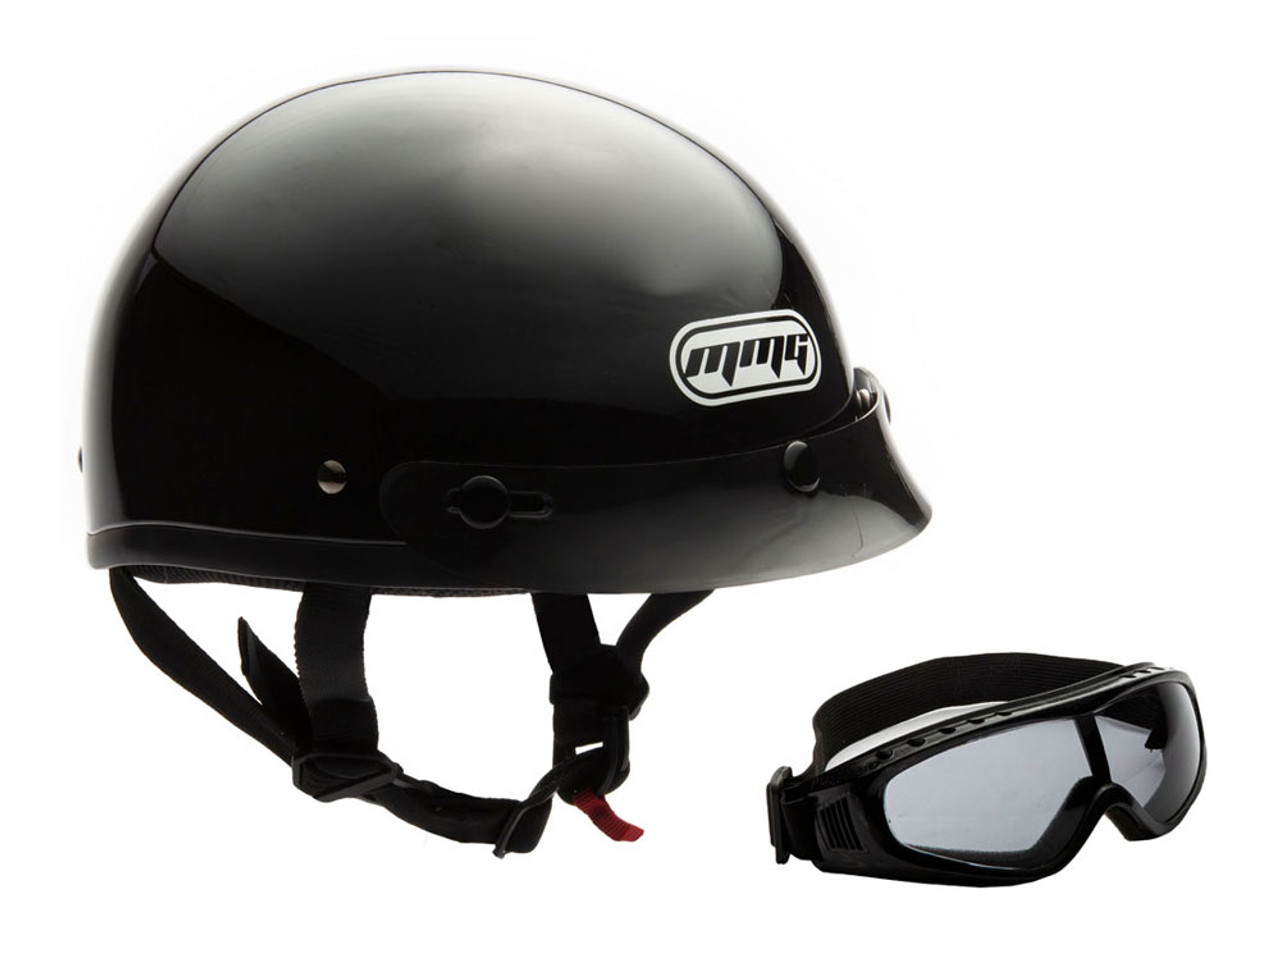 Shorty MMG Helmet - Beanie Model with DOT Approval (Free Goggles Included)